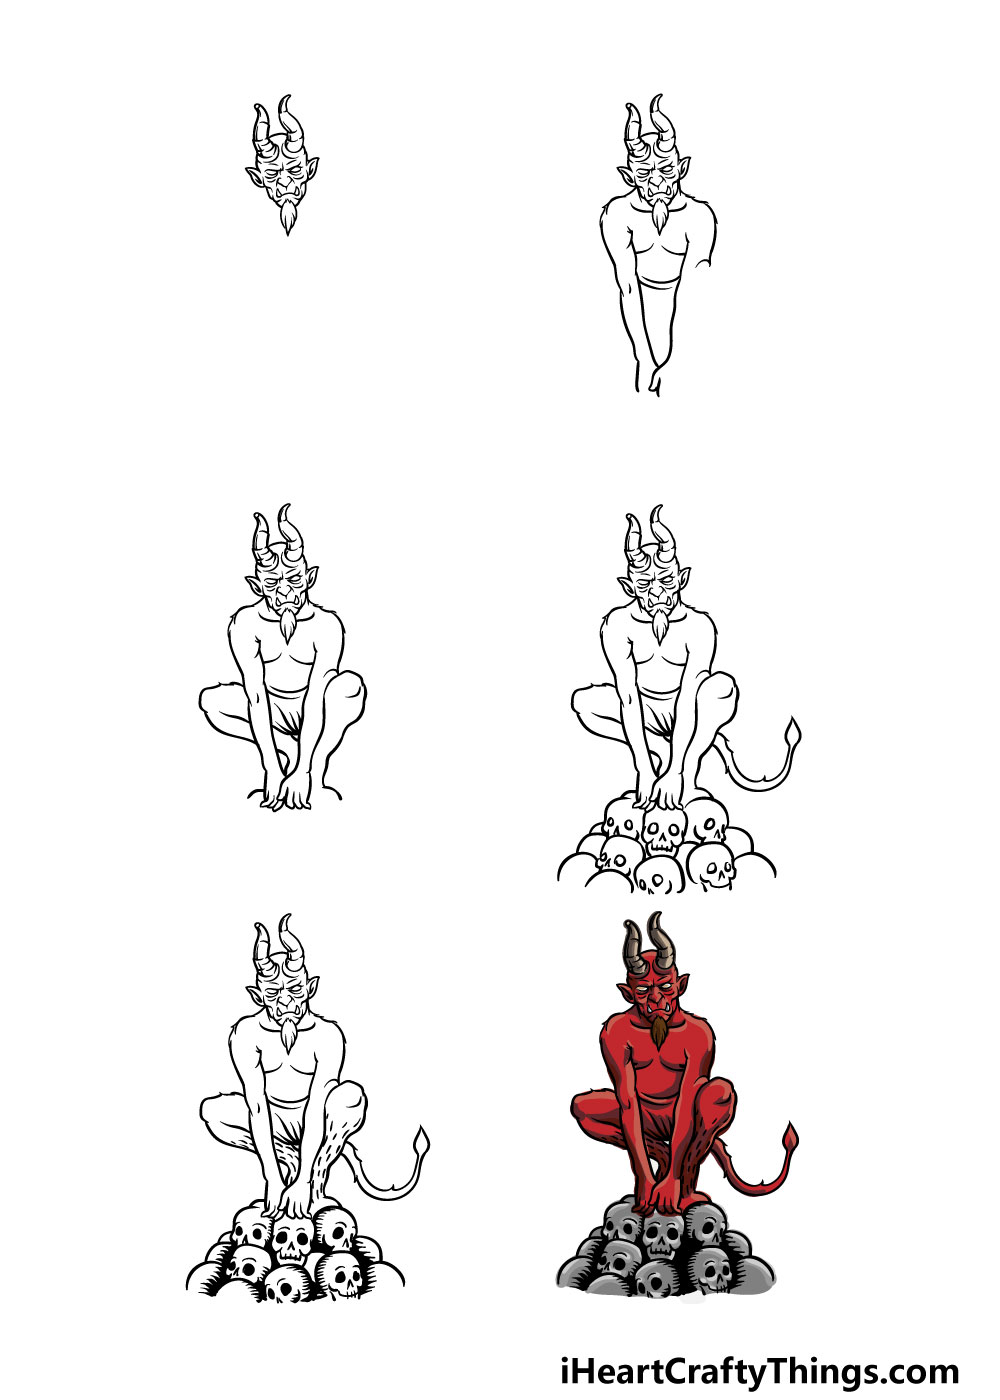 how to draw a demon in 6 steps